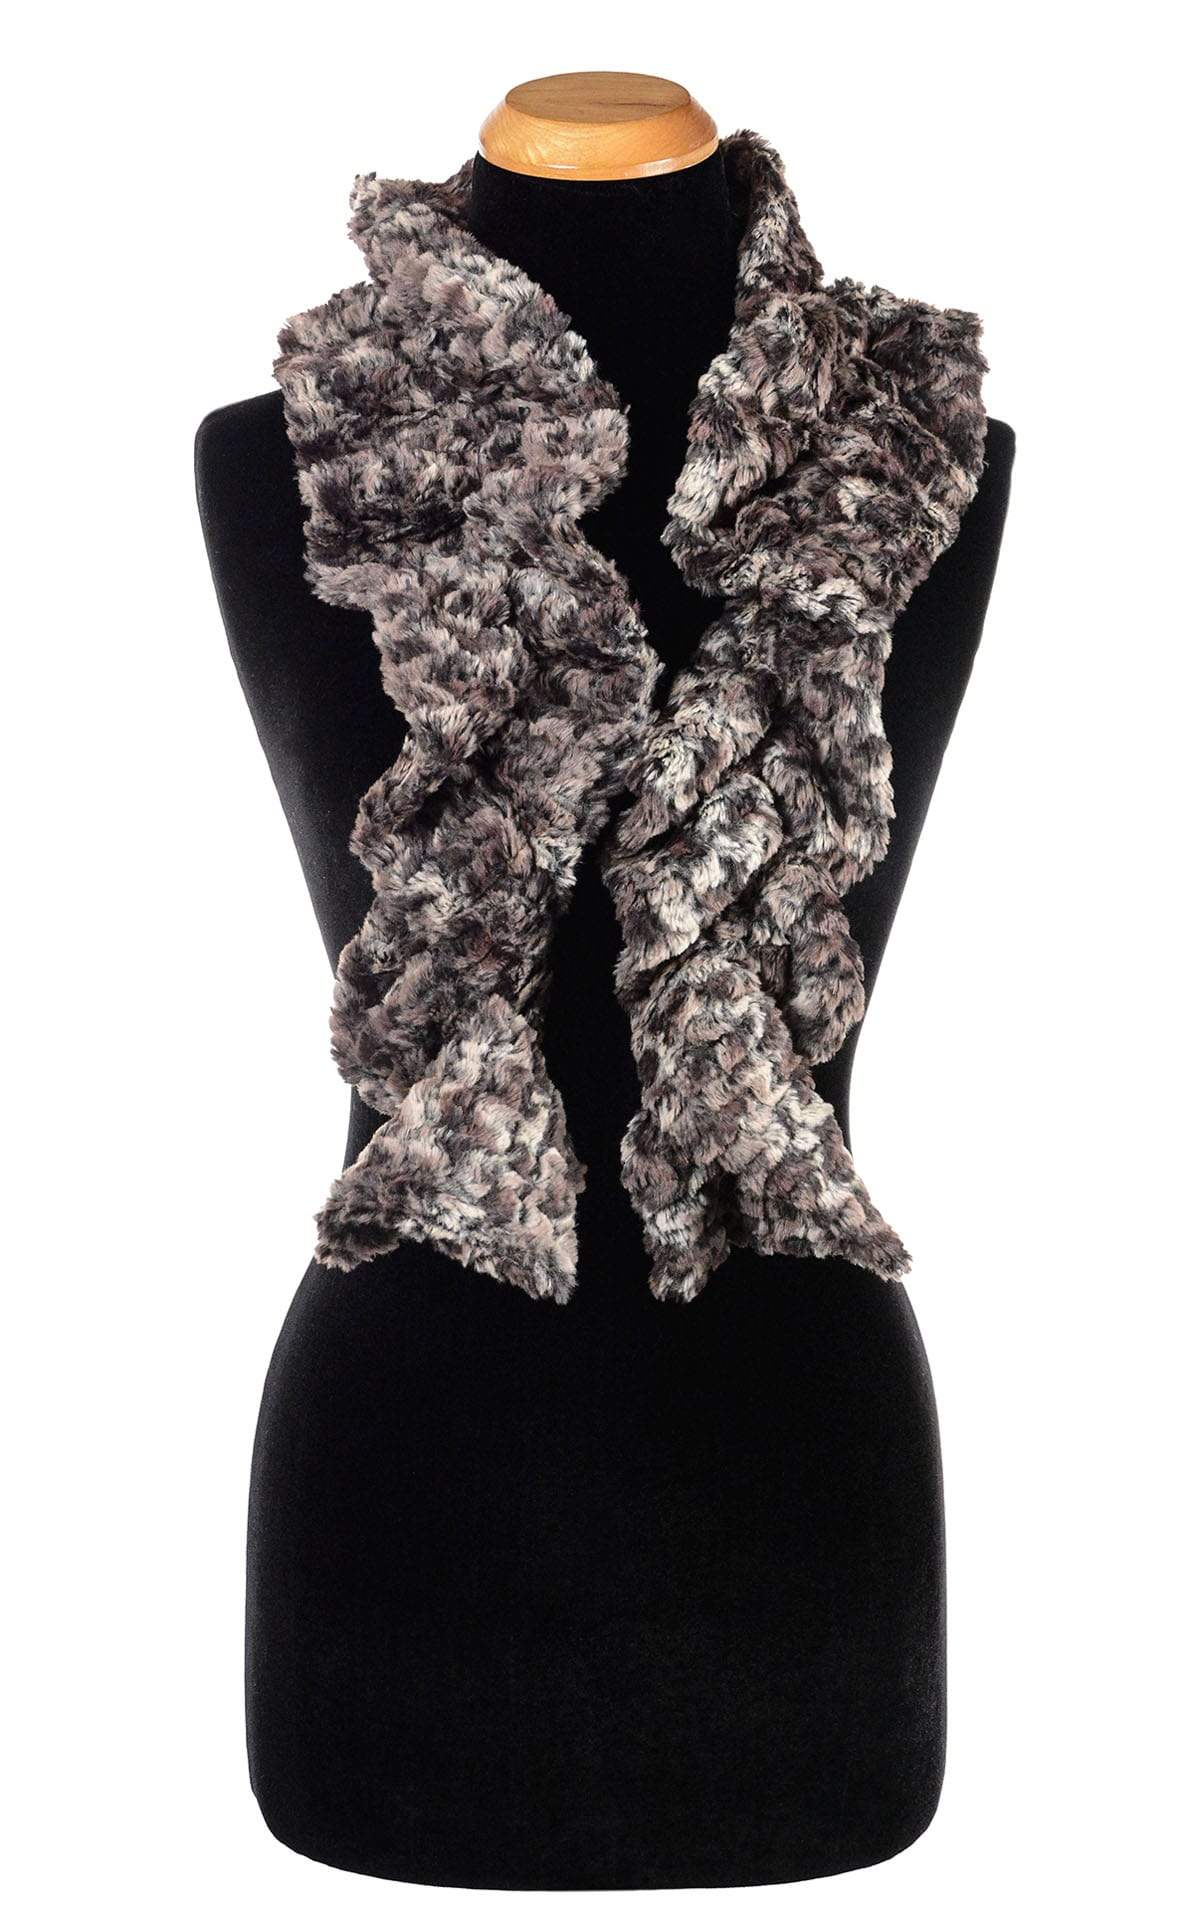 Scrunchy Scarf in Calico Faux Fur by Pandemonium Millinery | Seattle, WA  USA